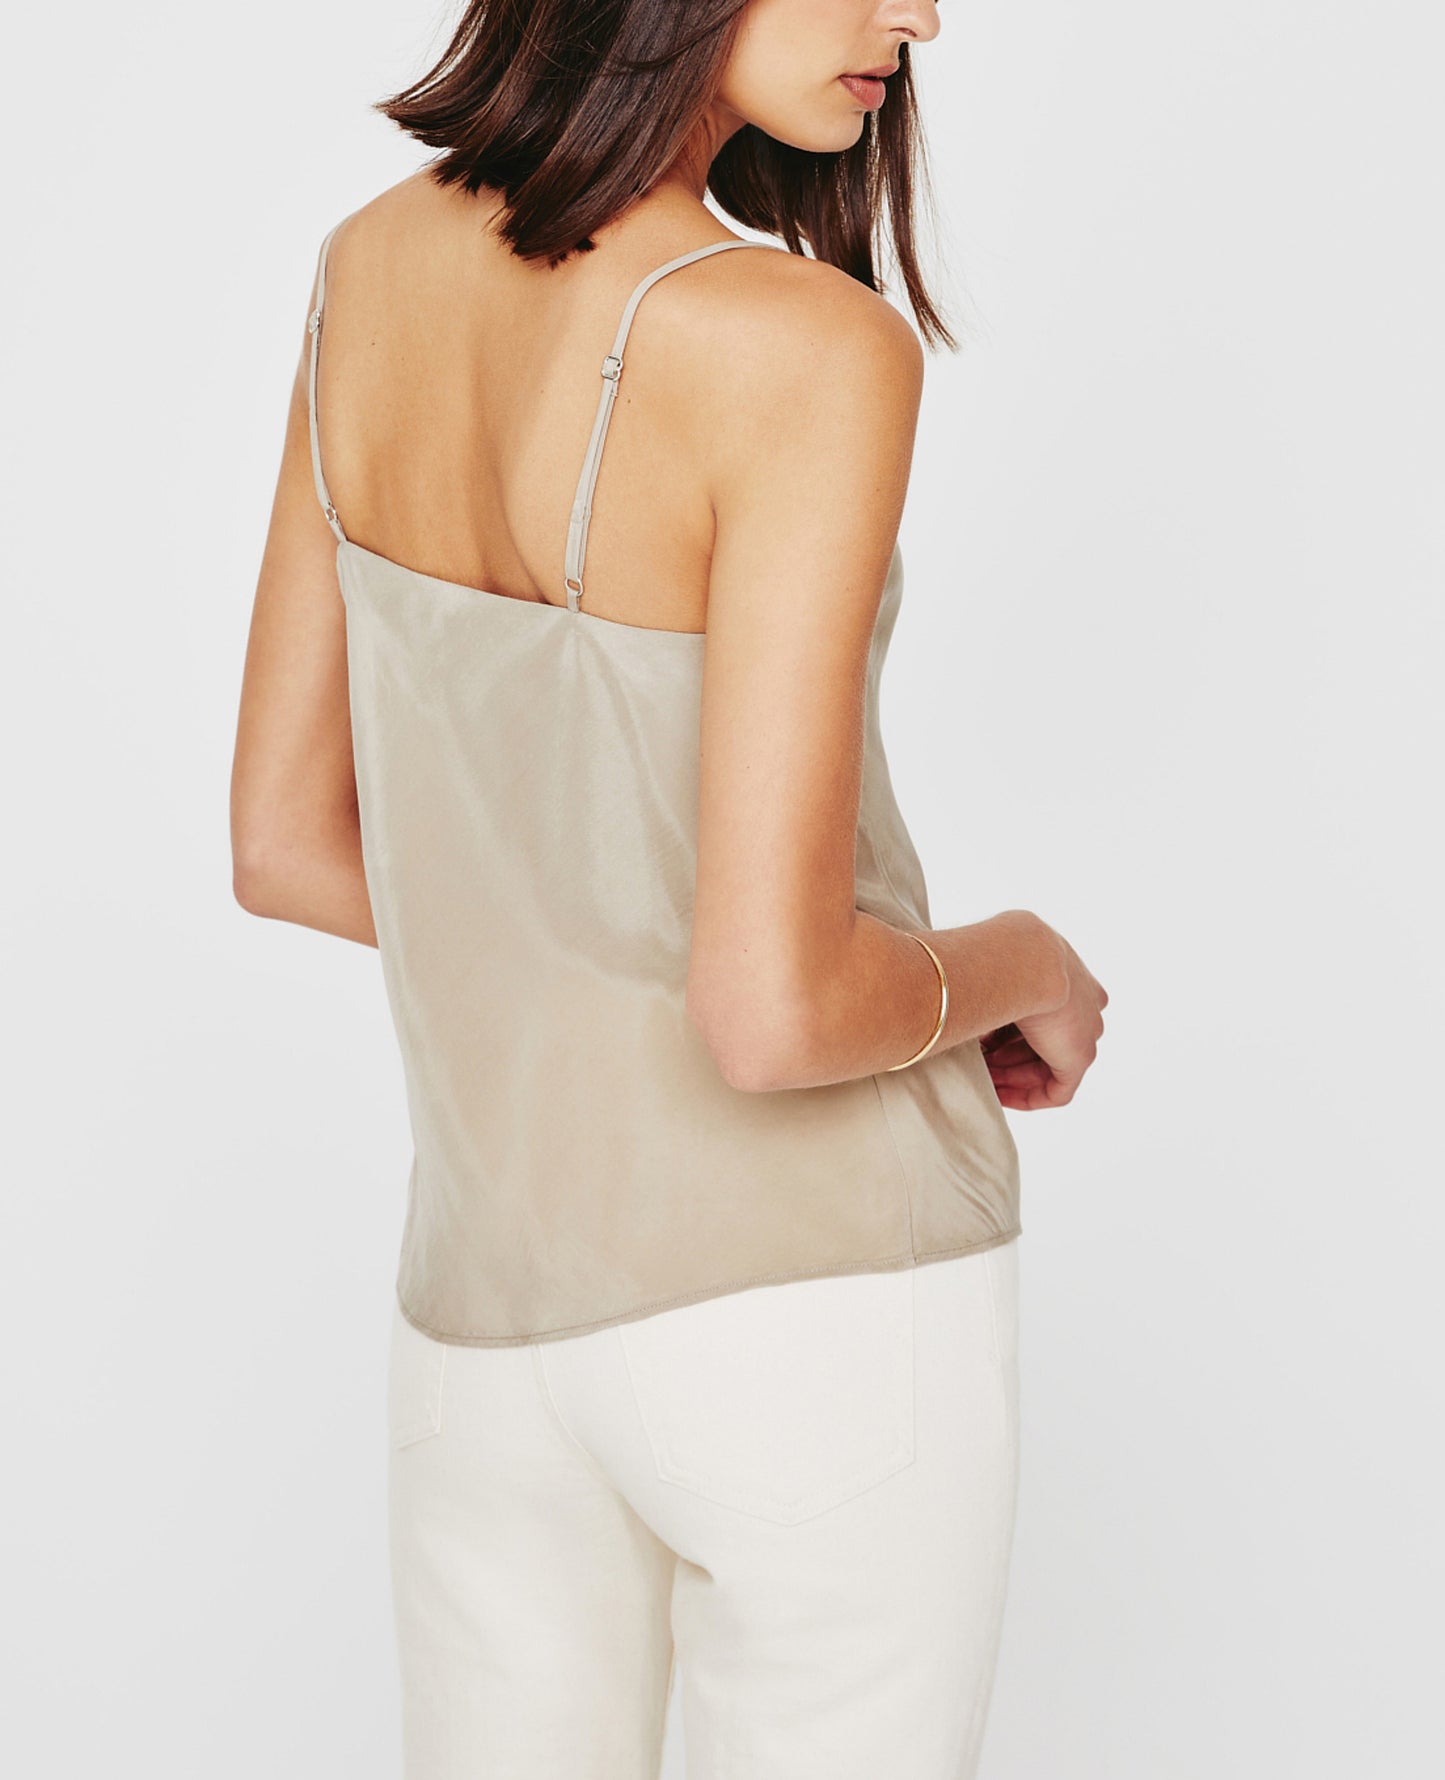 Scarlet Cami Wild Taupe Classic Camisole Women Tops Photo 6